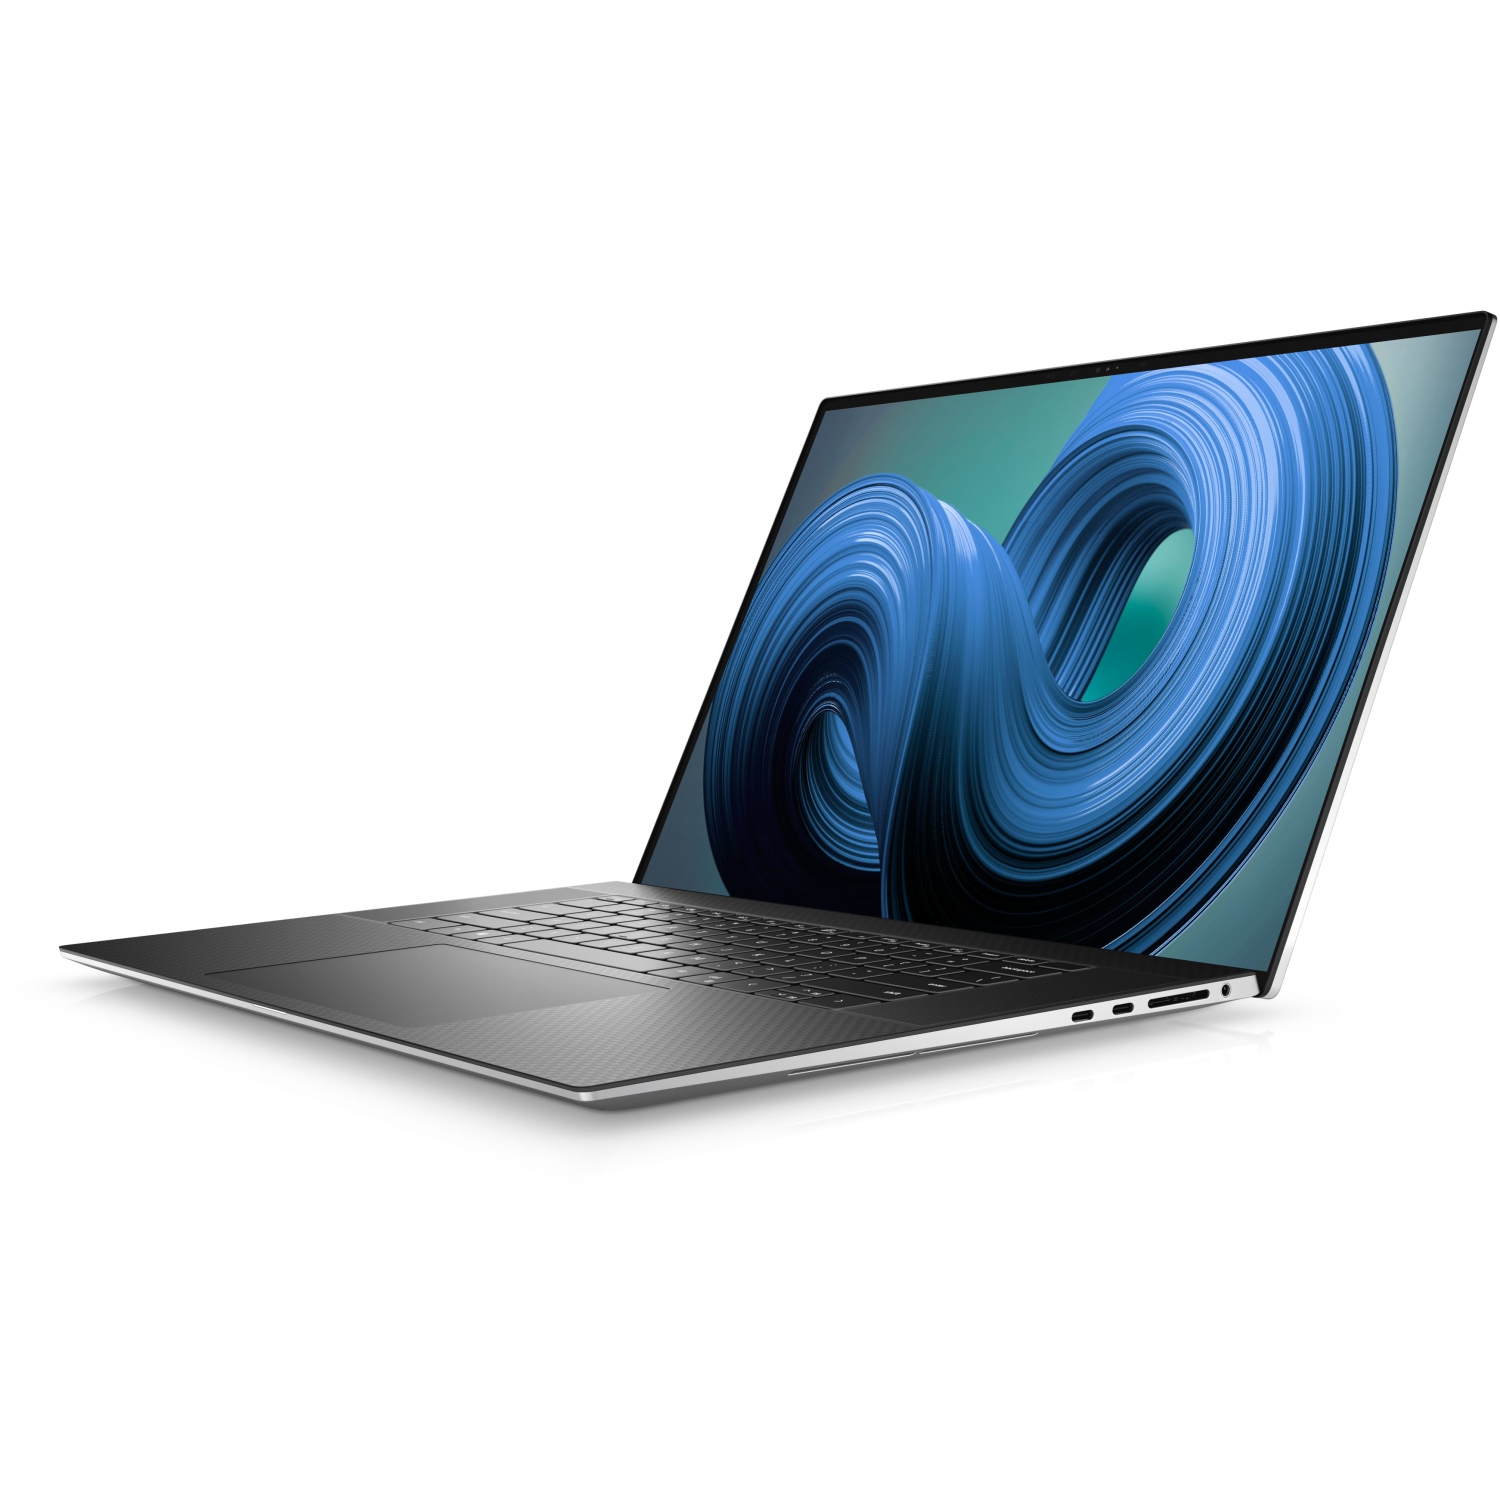 Refurbished (Excellent) – Dell XPS 9720 Laptop (2022) | 17" 4K Touch | Core i7 - 1TB SSD - 32GB RAM - RTX 3060 | 14 Cores @ 4.7 GHz - 12th Gen CPU - 12GB GDDR6